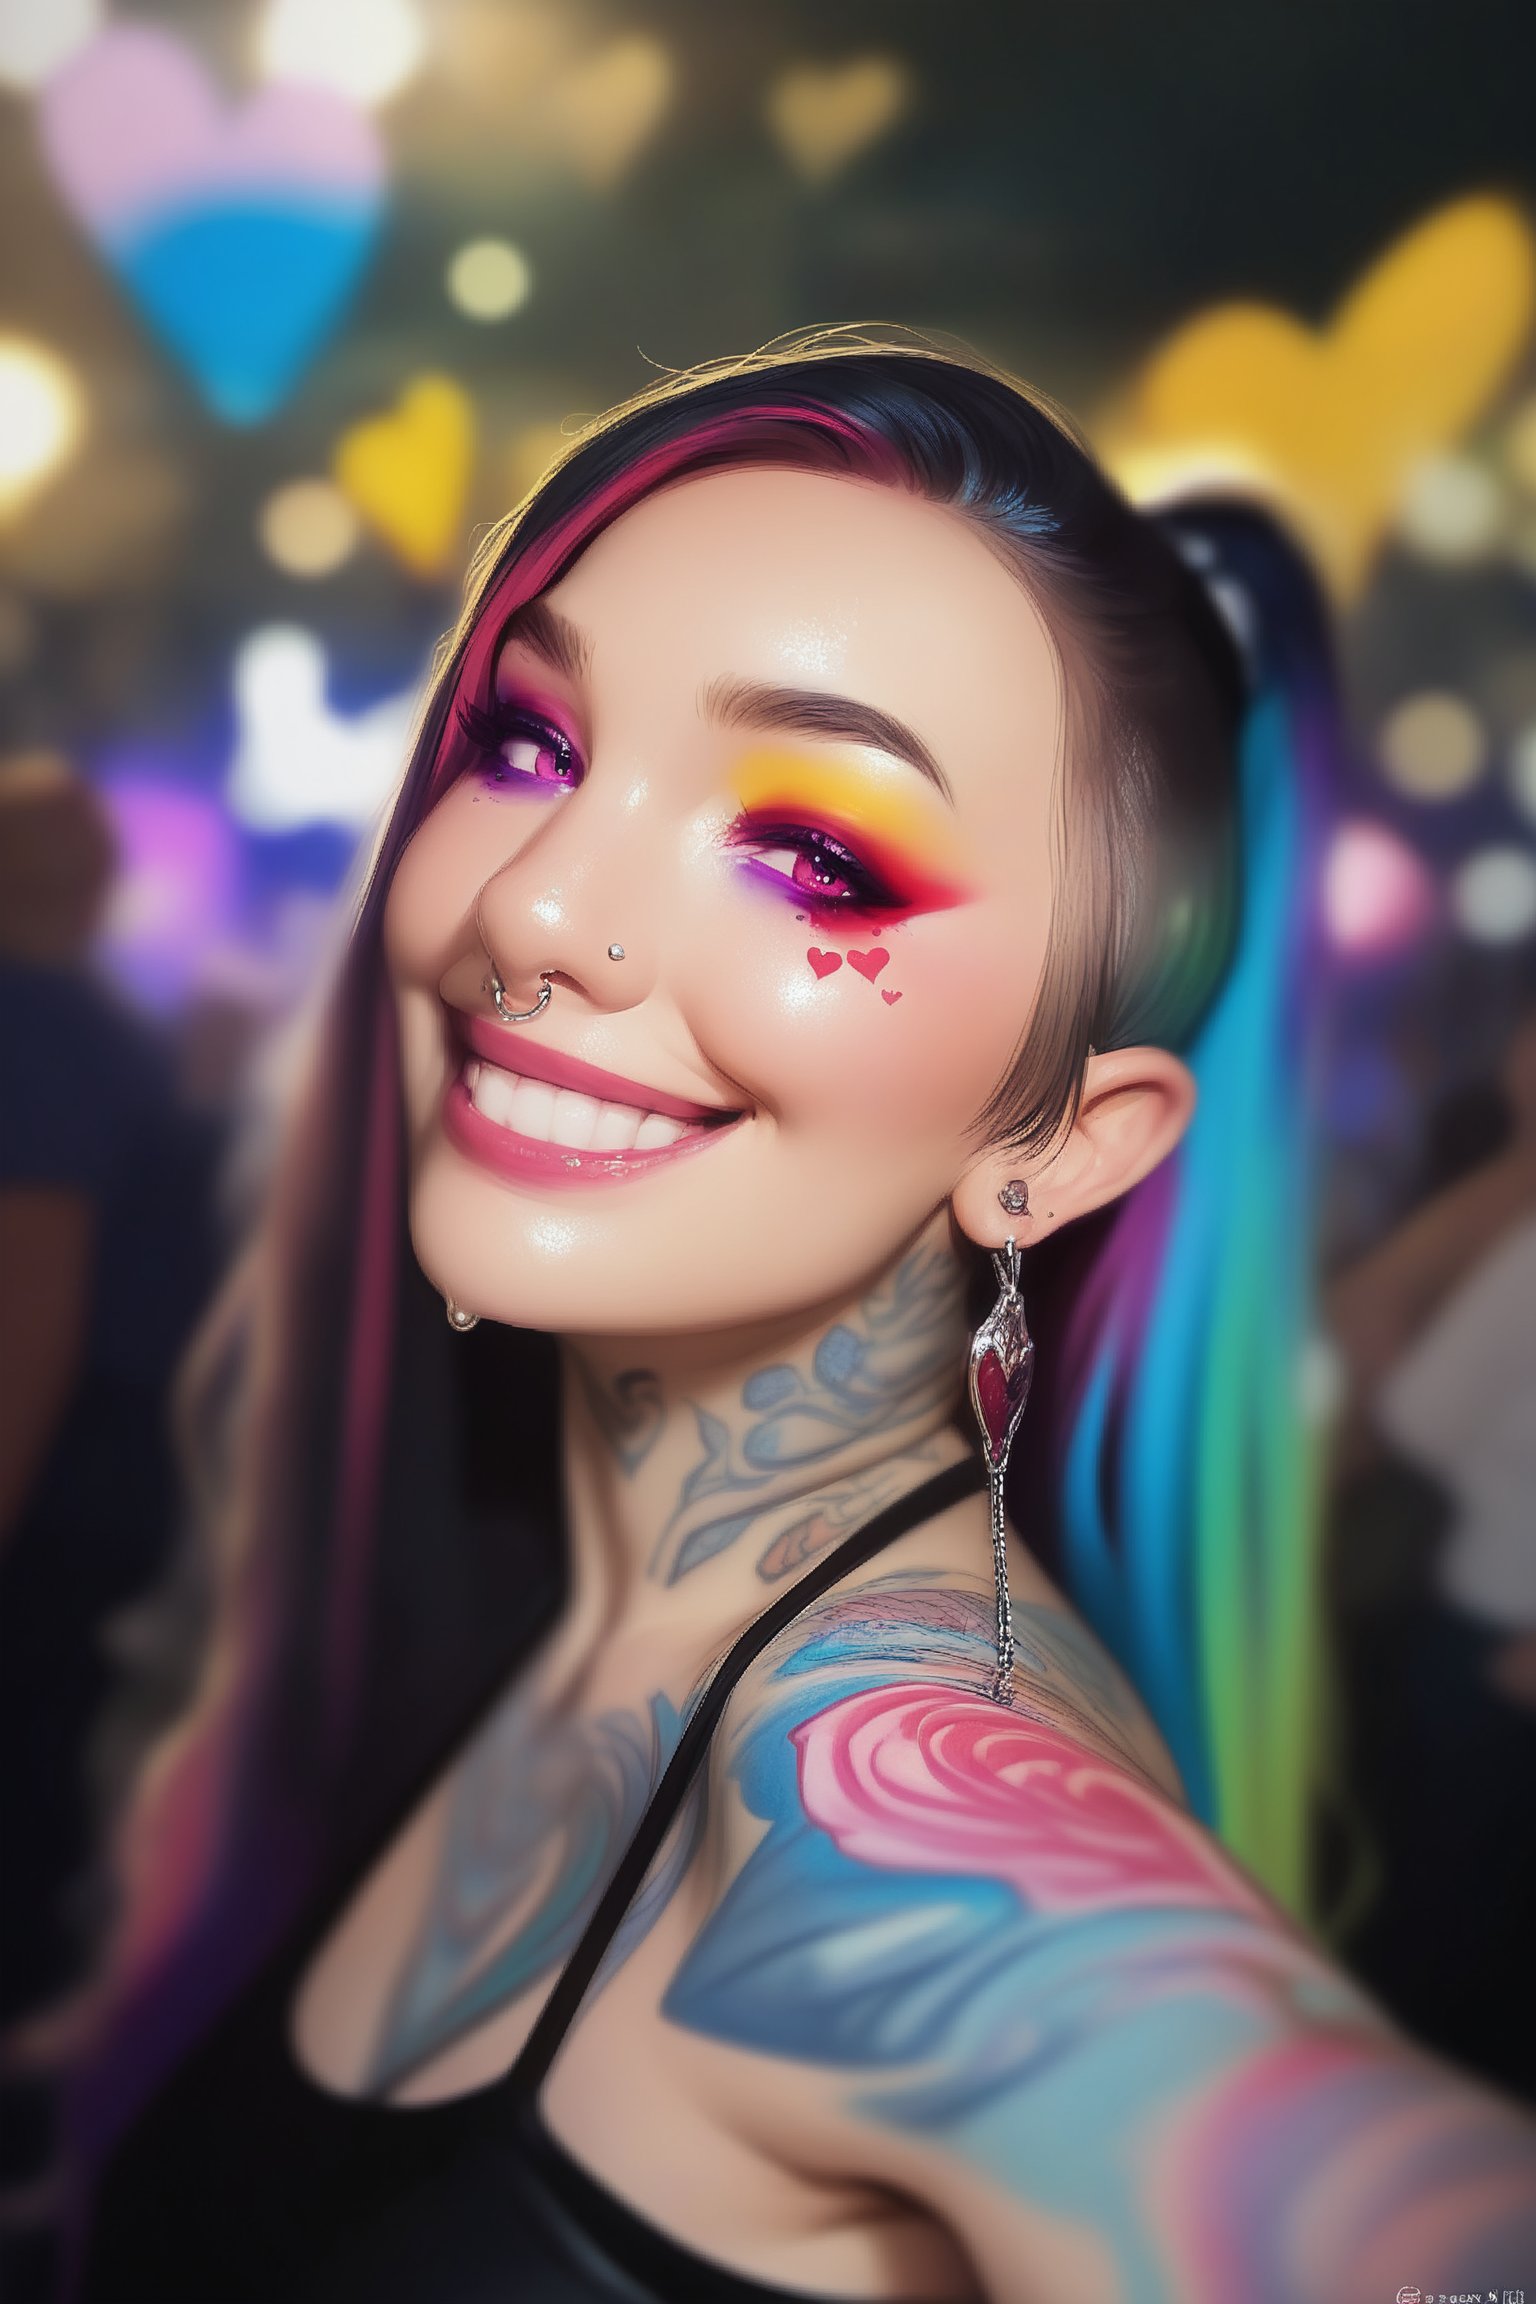 score_9,score_8_up, score_7_up, score_6_up, score_5_up, score_4_up, futanari, looking at viewer, fair skin, bobbed hair, ((raver girl, colorful makeup, piercings, tattoos)), breasts, thicc, curvy,((penis,flaccid, testicles)), (lascivious grin), posed, pinup girl, hearts, covered in dripping cum, dripping pre cum, hyper realism, photo realistic, 8k, digital slr,glitter, nightime, music festival, lasers, bokeh,pink-emo